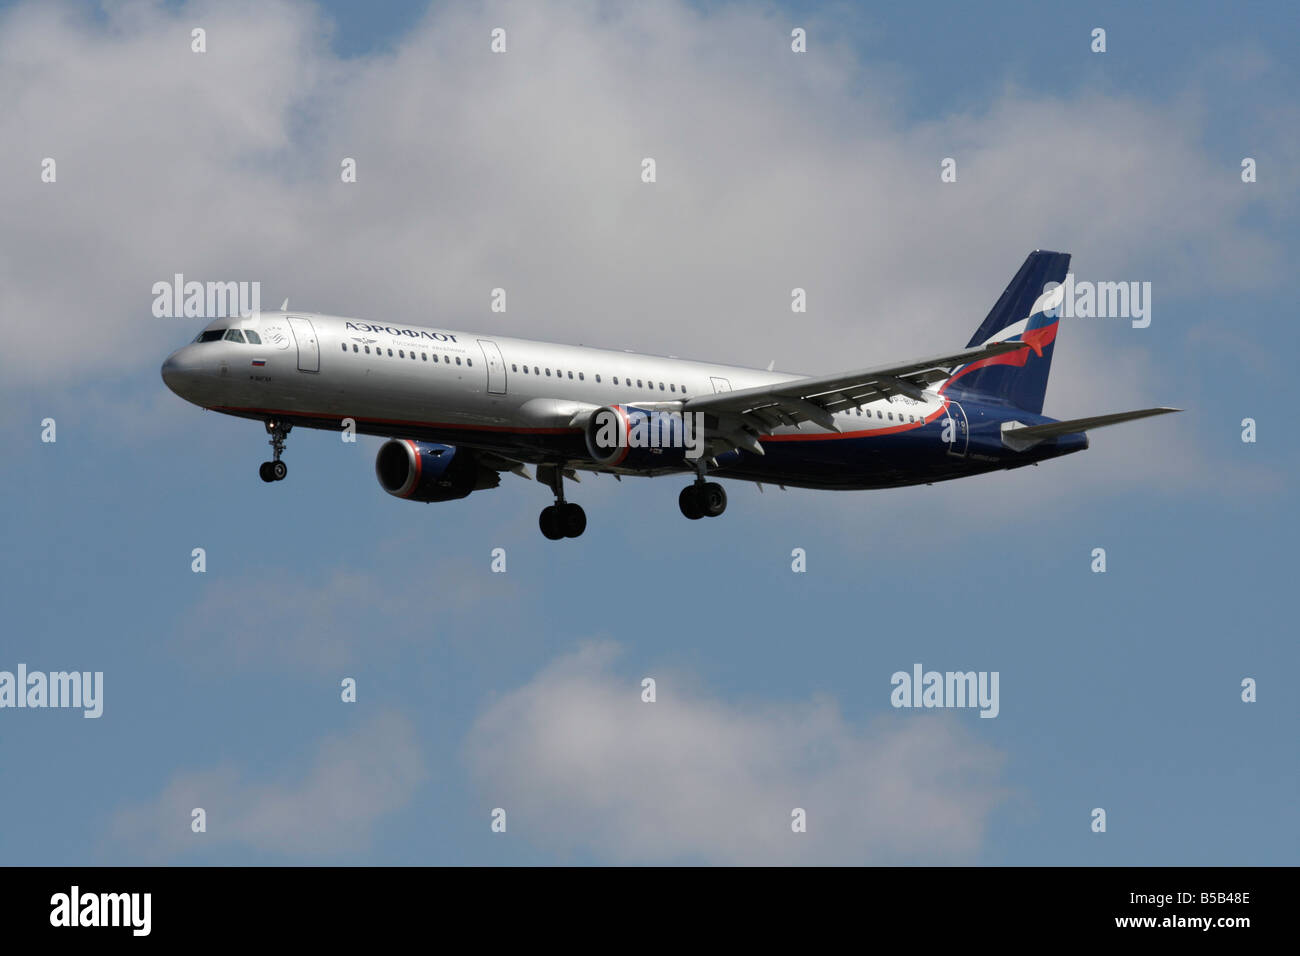 Aeroflot Airbus A321 commercial passenger jet plane flying on approach Stock Photo